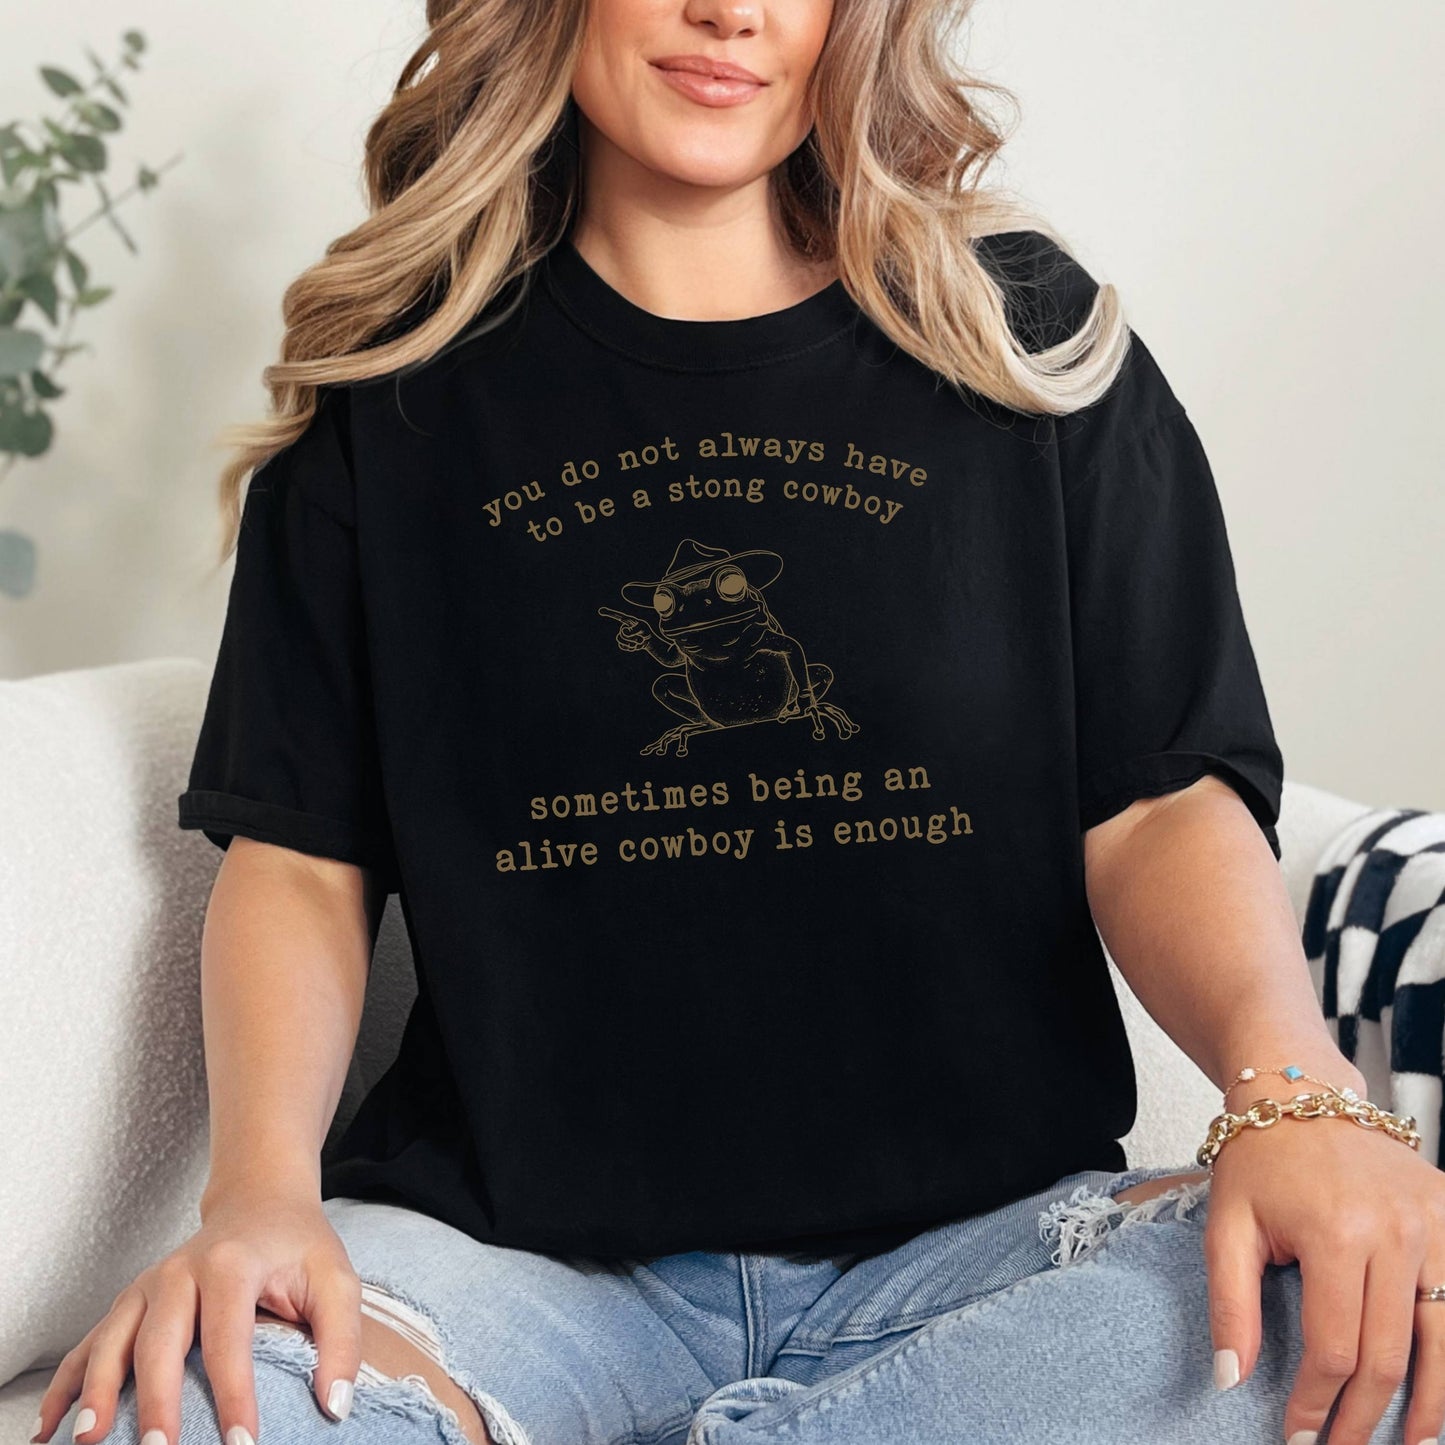 You Do Not Always Have to Be Strong T-Shirt, Cowboy T-Shirt